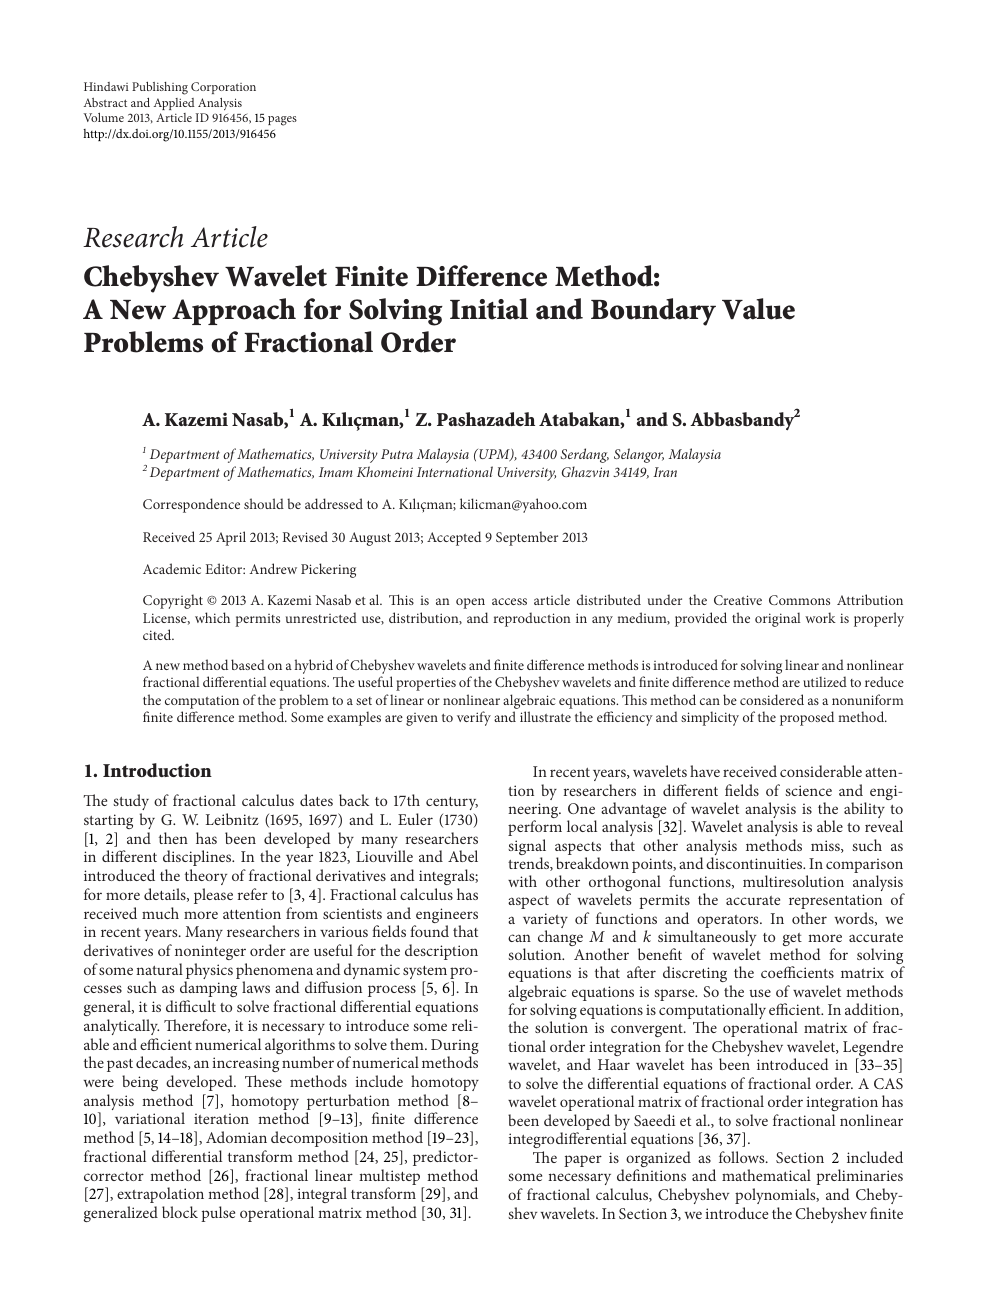 Chebyshev Wavelet Finite Difference Method A New Approach For Solving Initial And Boundary Value Problems Of Fractional Order Topic Of Research Paper In Mathematics Download Scholarly Article Pdf And Read For